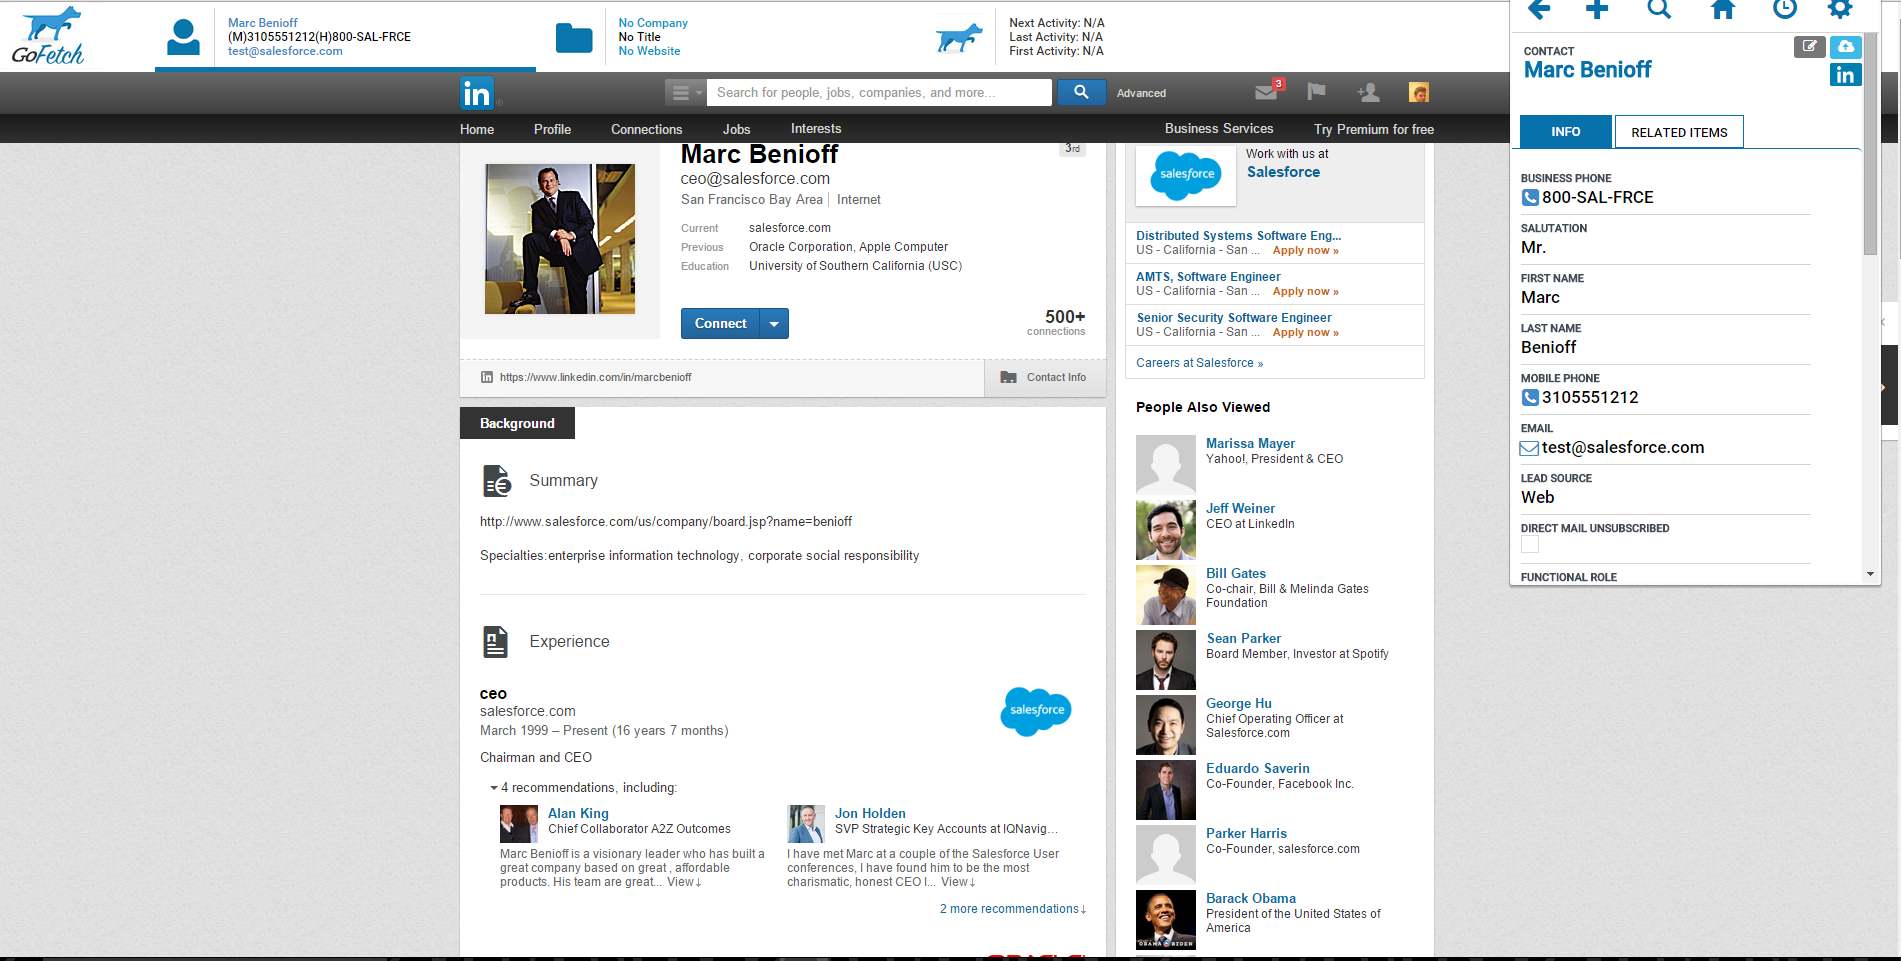 GoFetch Salesforce Browser Extension Image 2